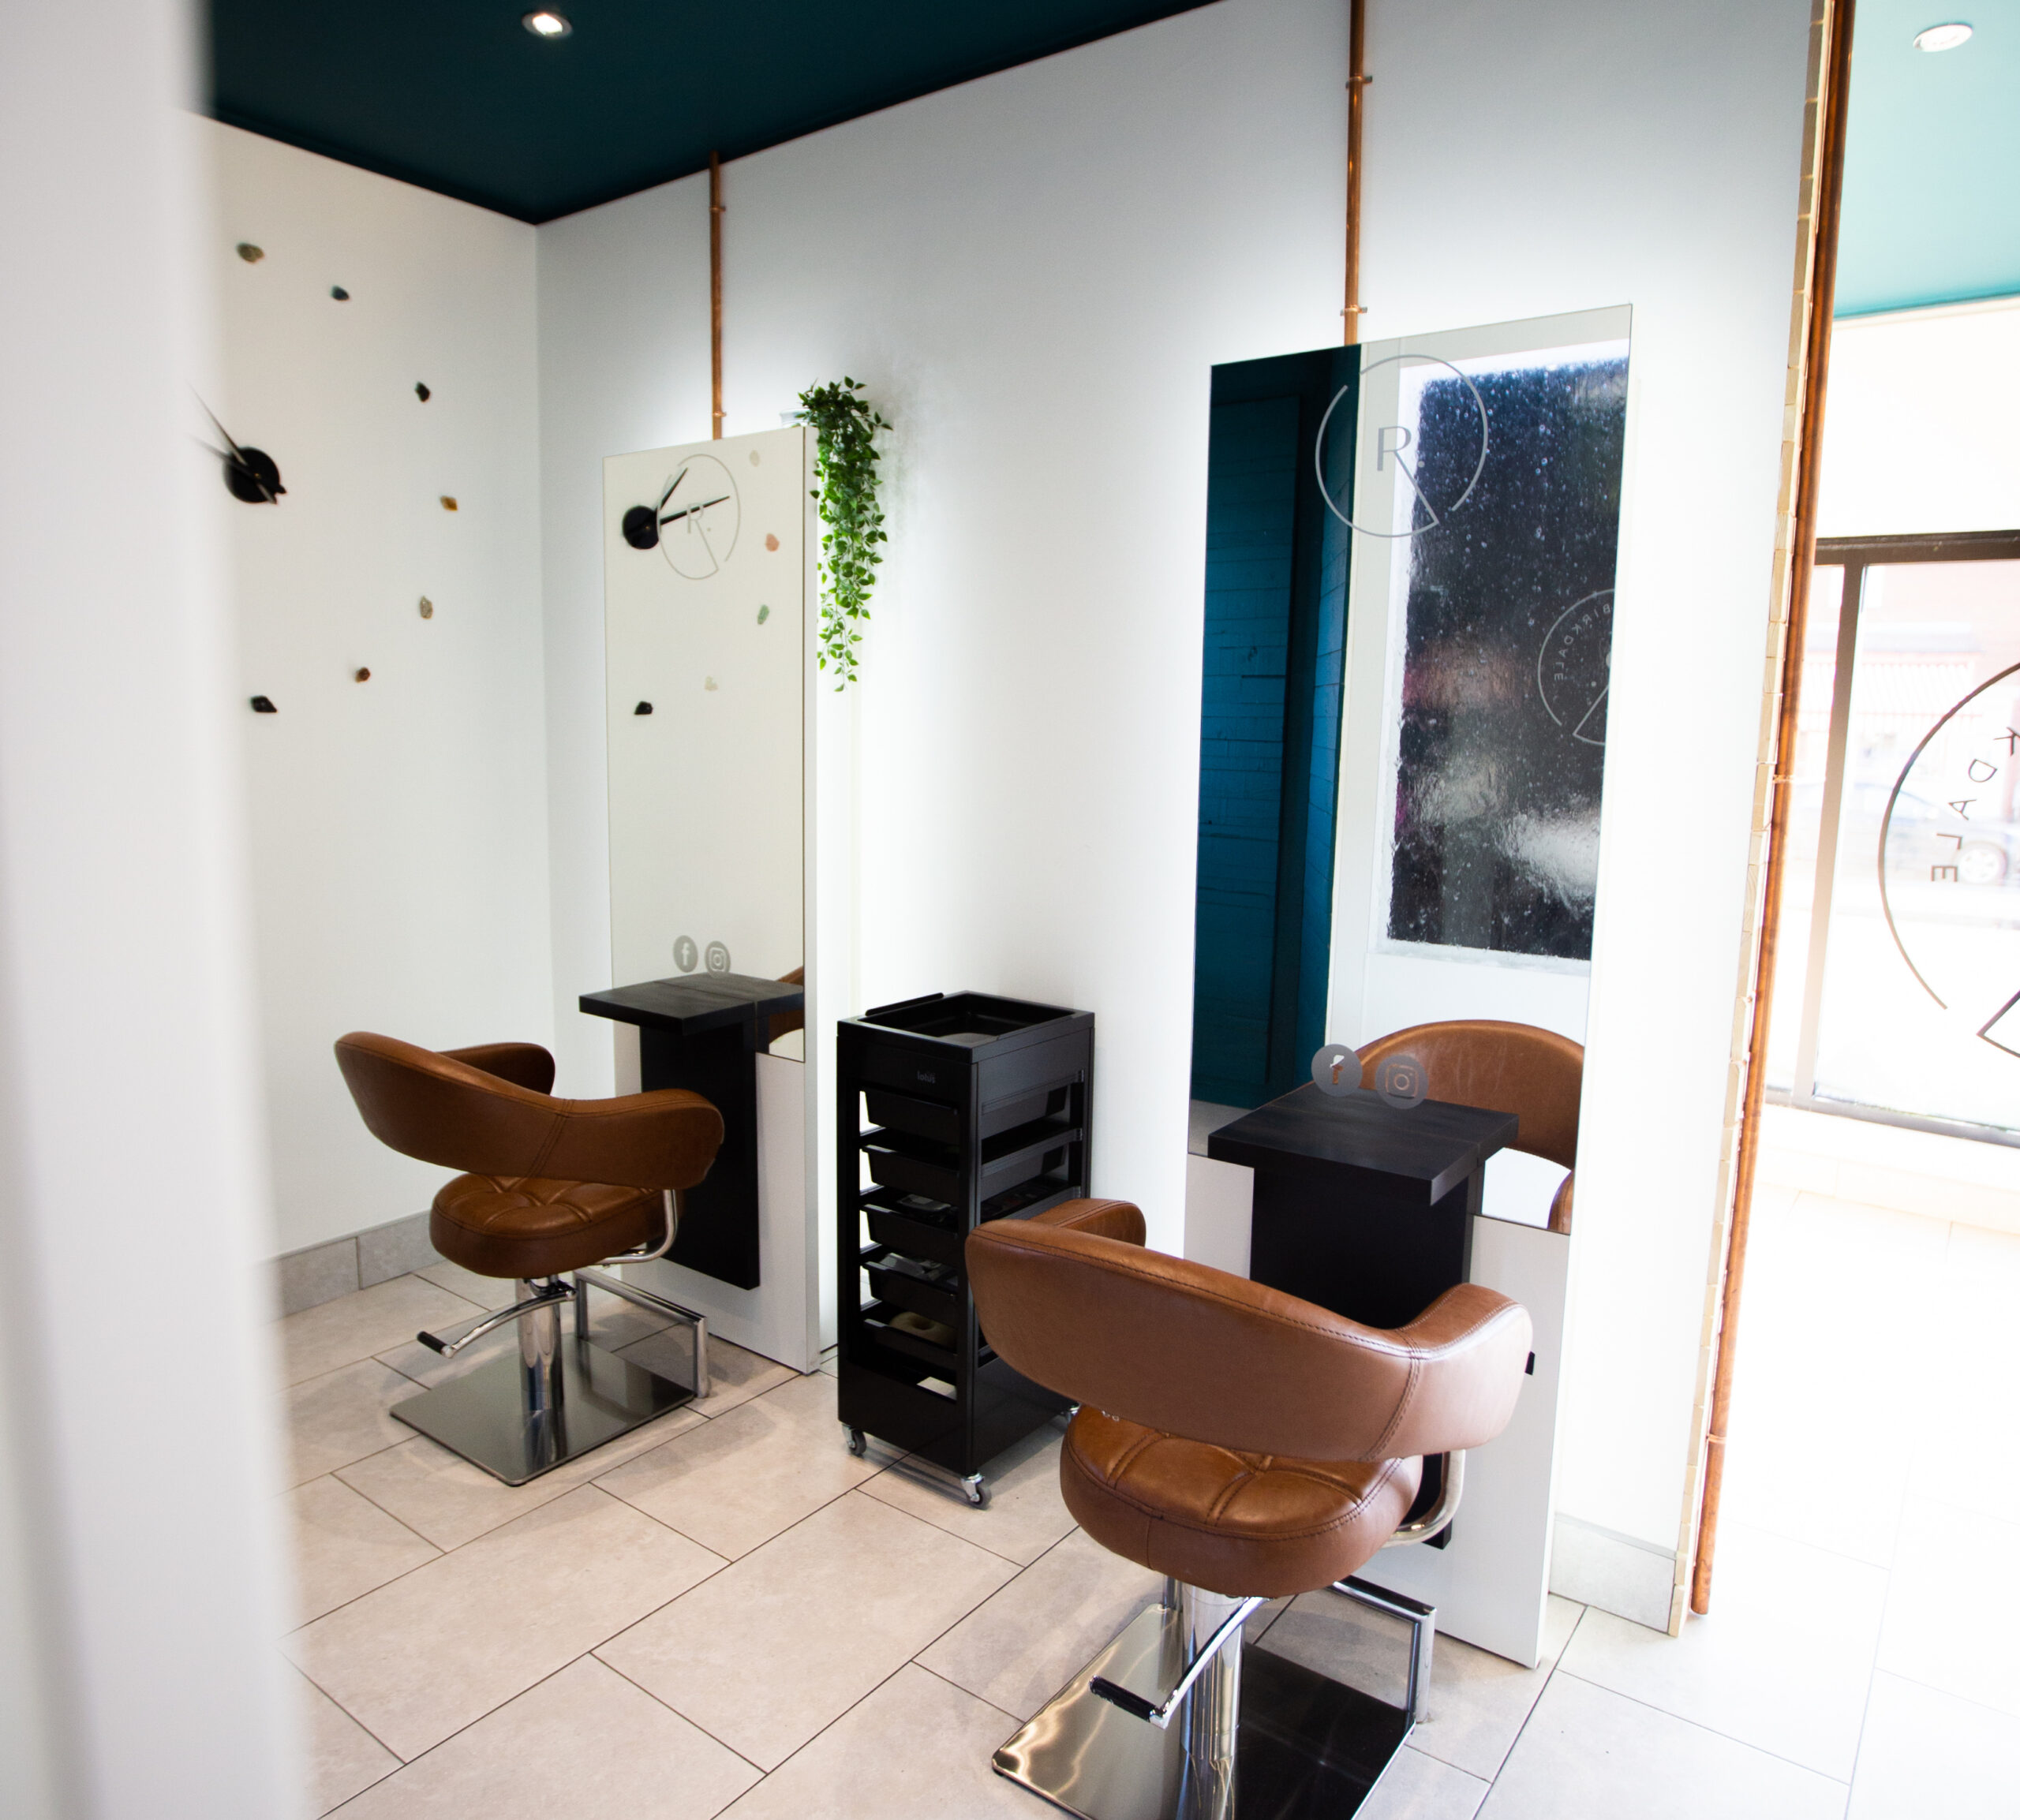 REECE BIRKDALE offers a wide range of treatments thanks to varied skillset of its team